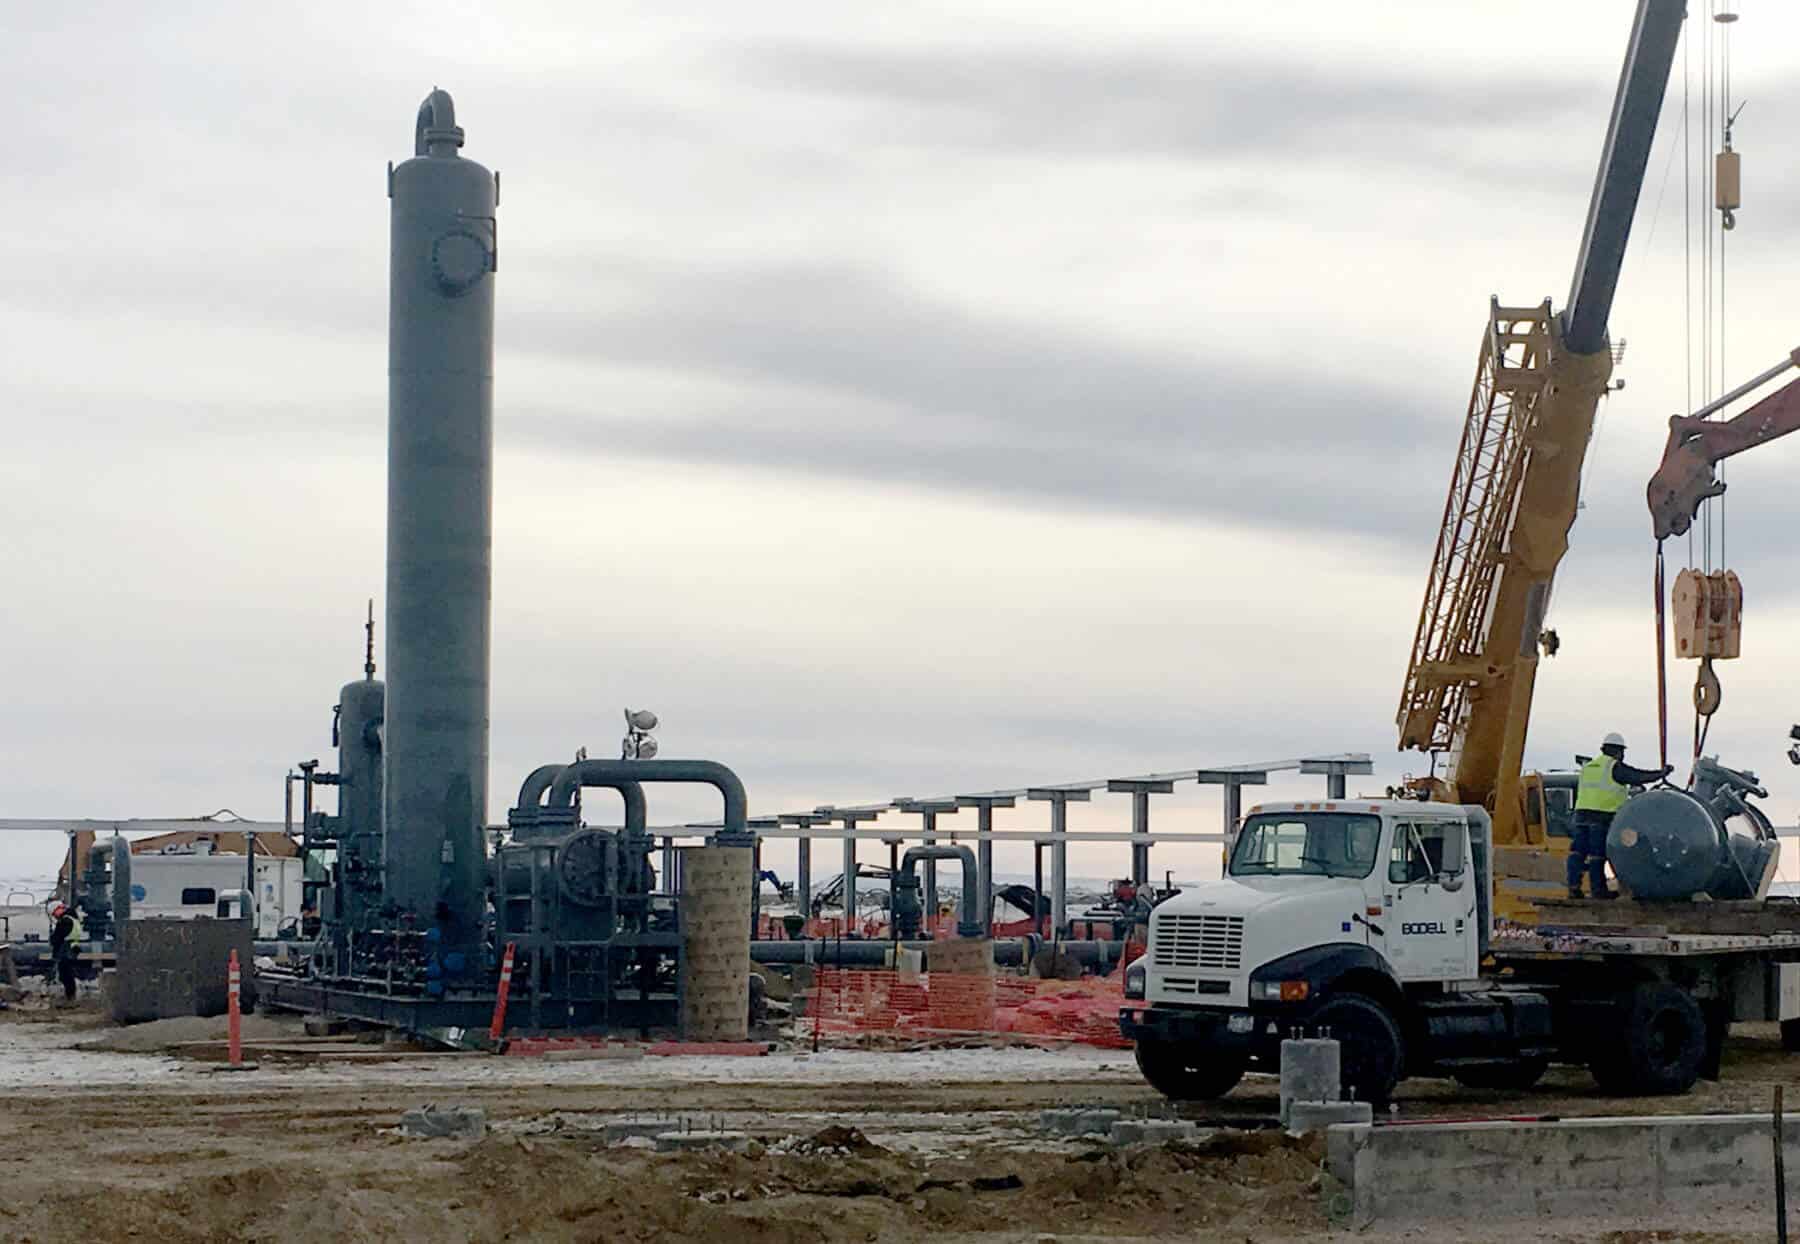 The Compression Facility at Wamsutter, Wyoming makes significant headway despite cold winter conditions.